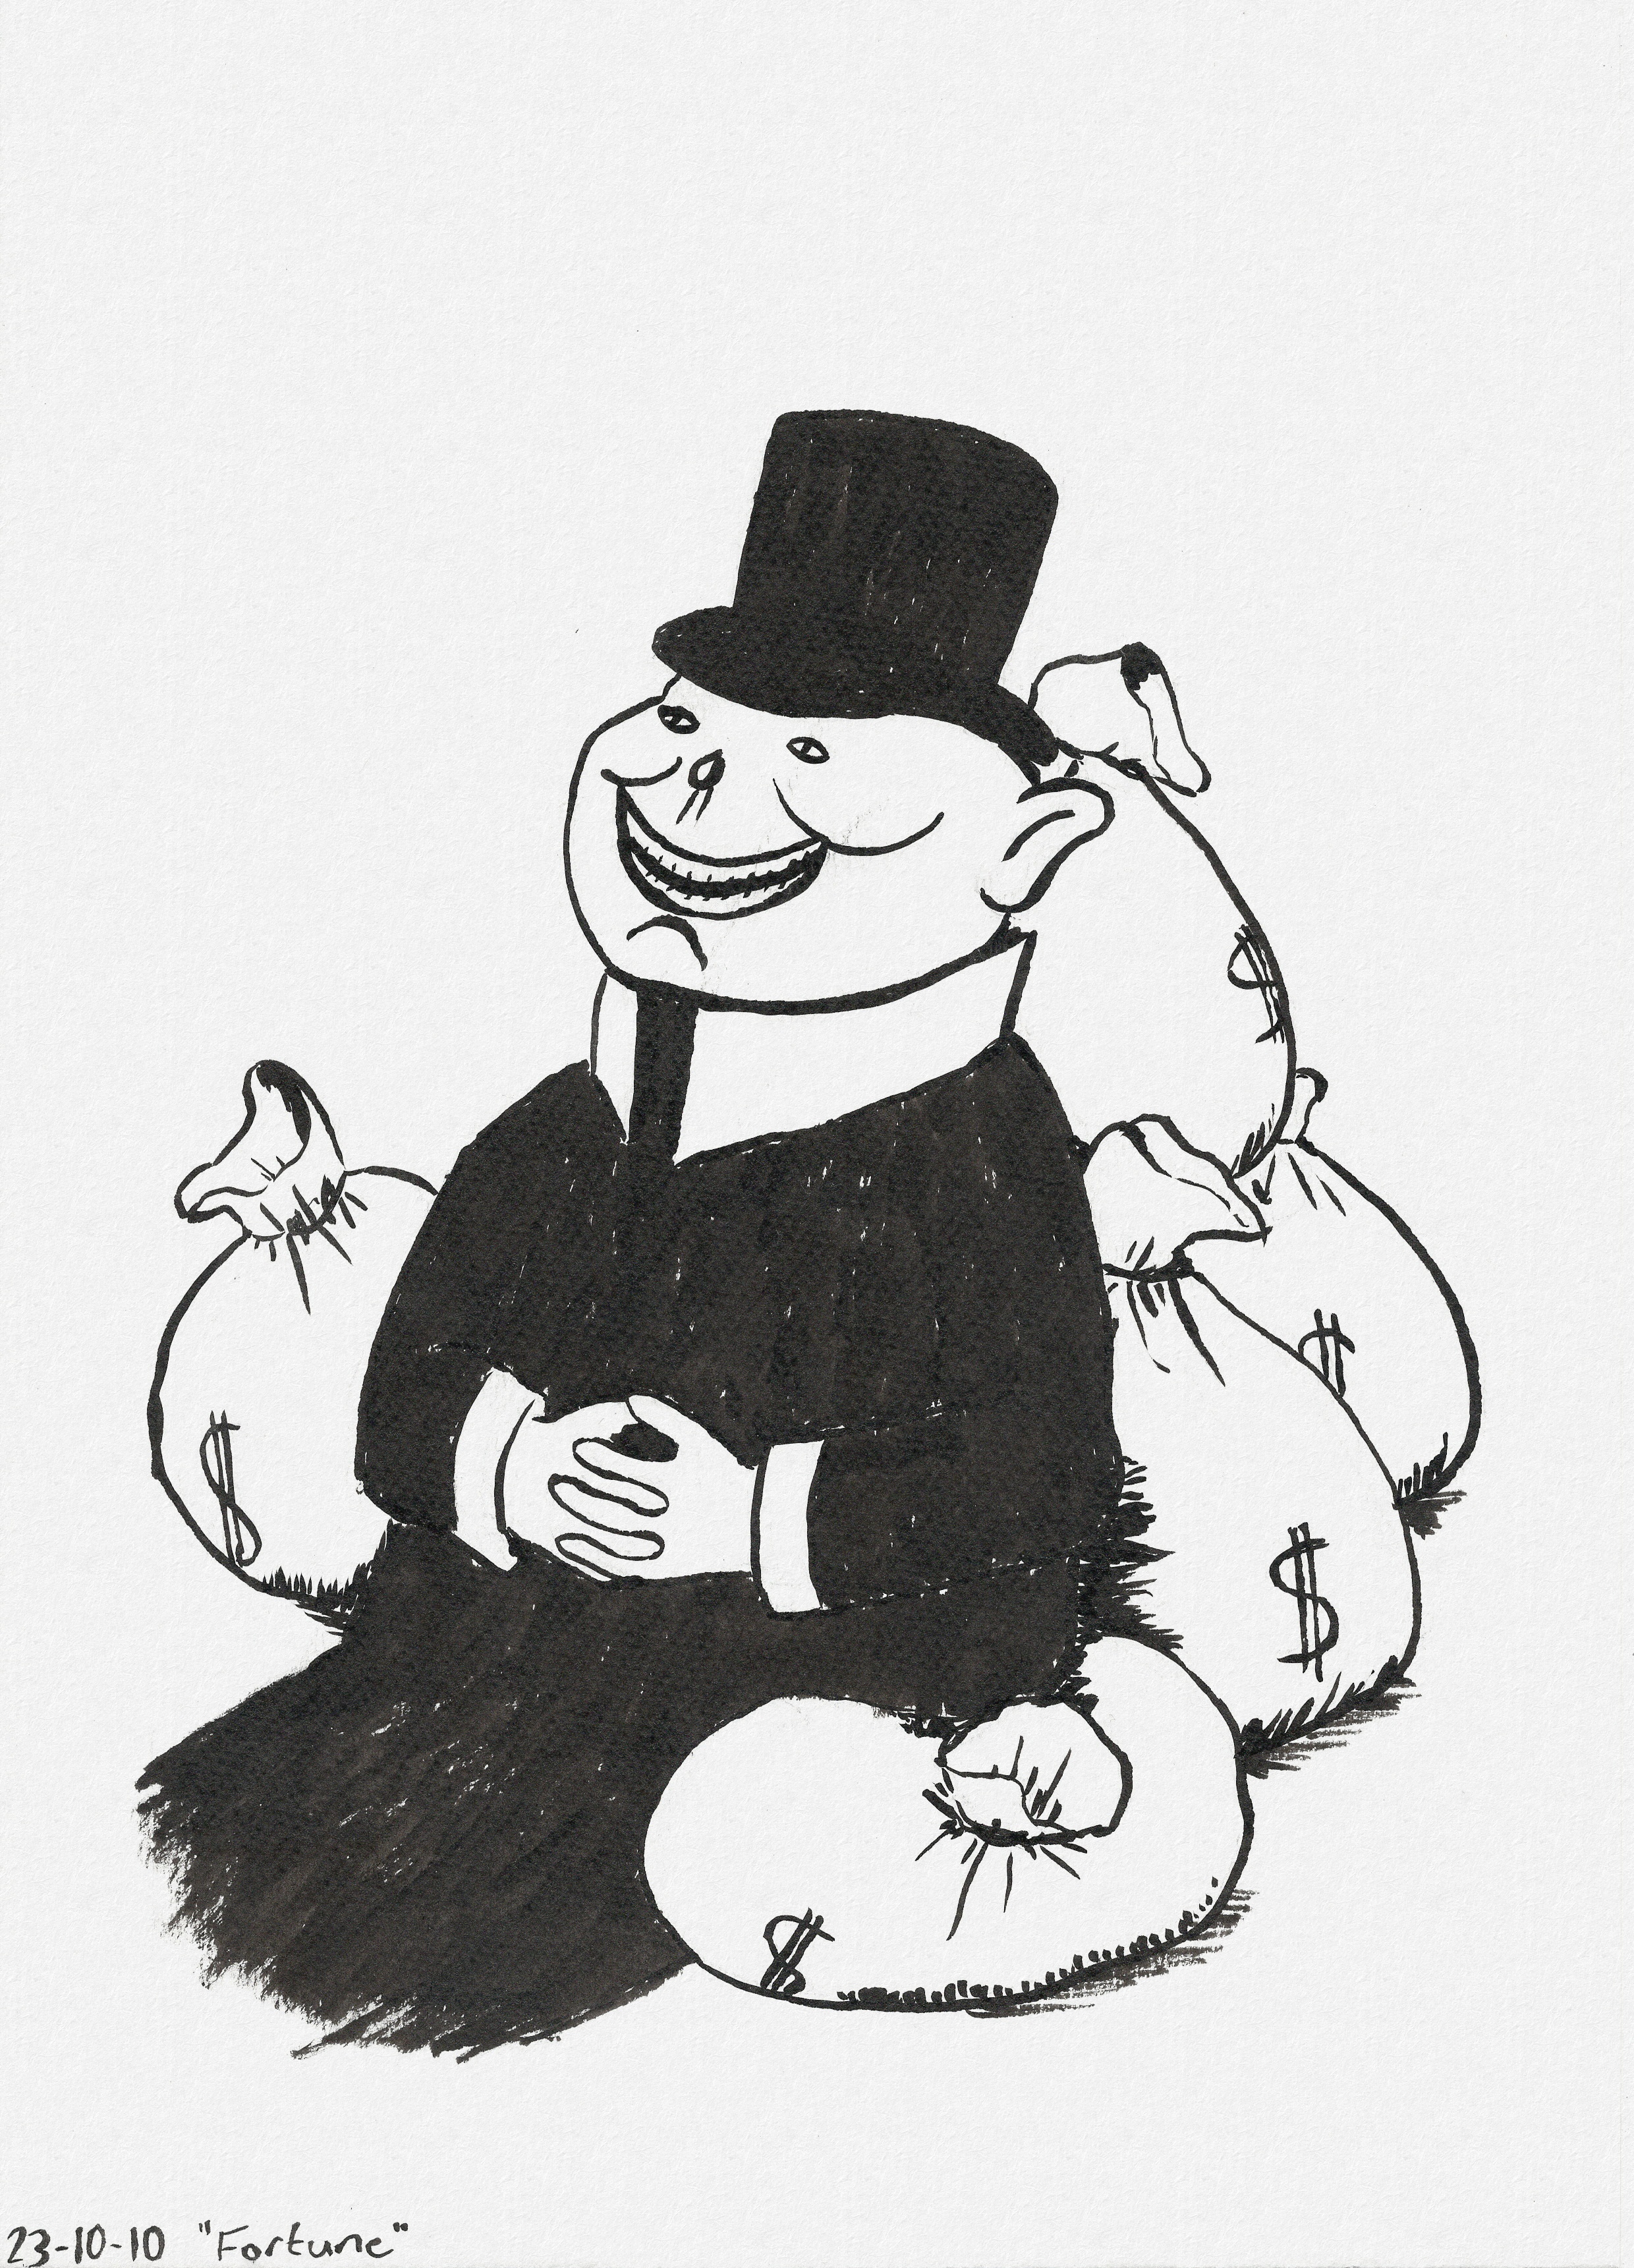 Porky the Capitalist Pig sitting on a pile of big money bags.